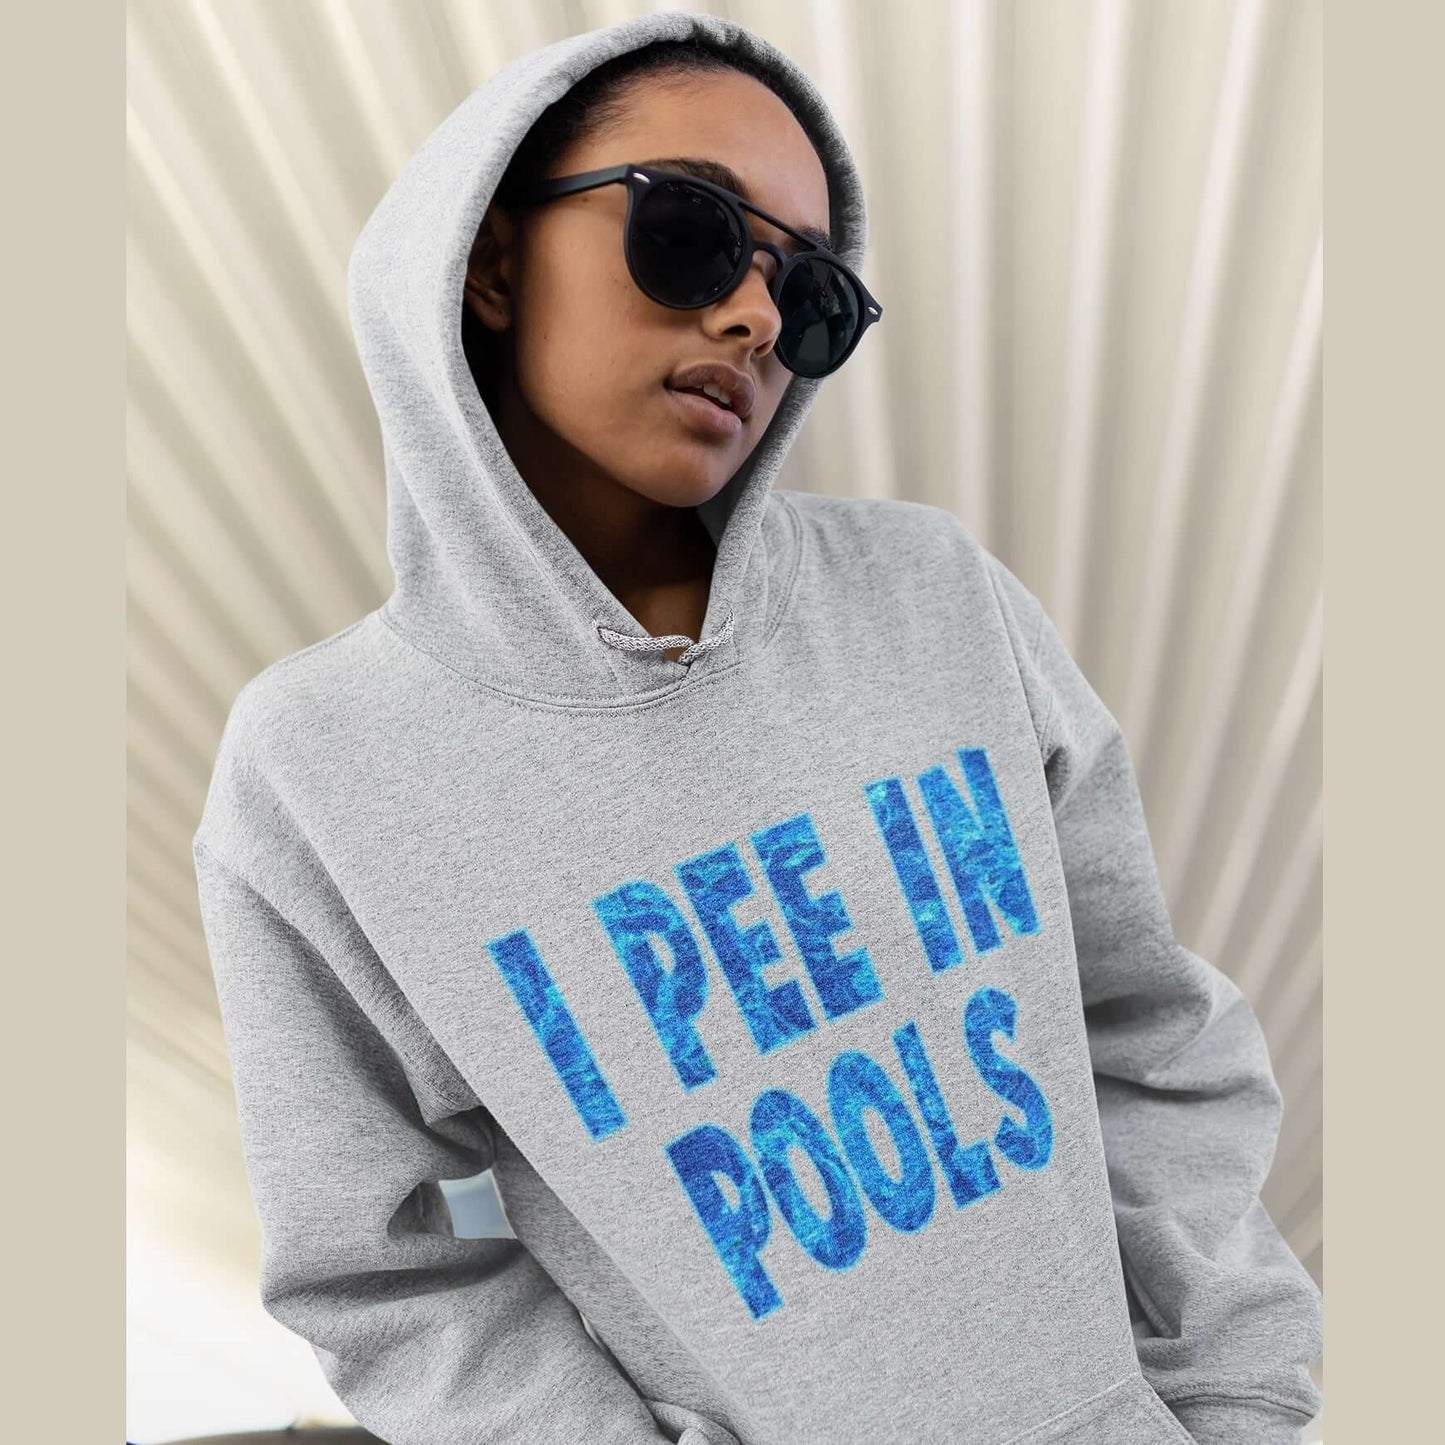 woman wearing sunglasses and hoodie by pool